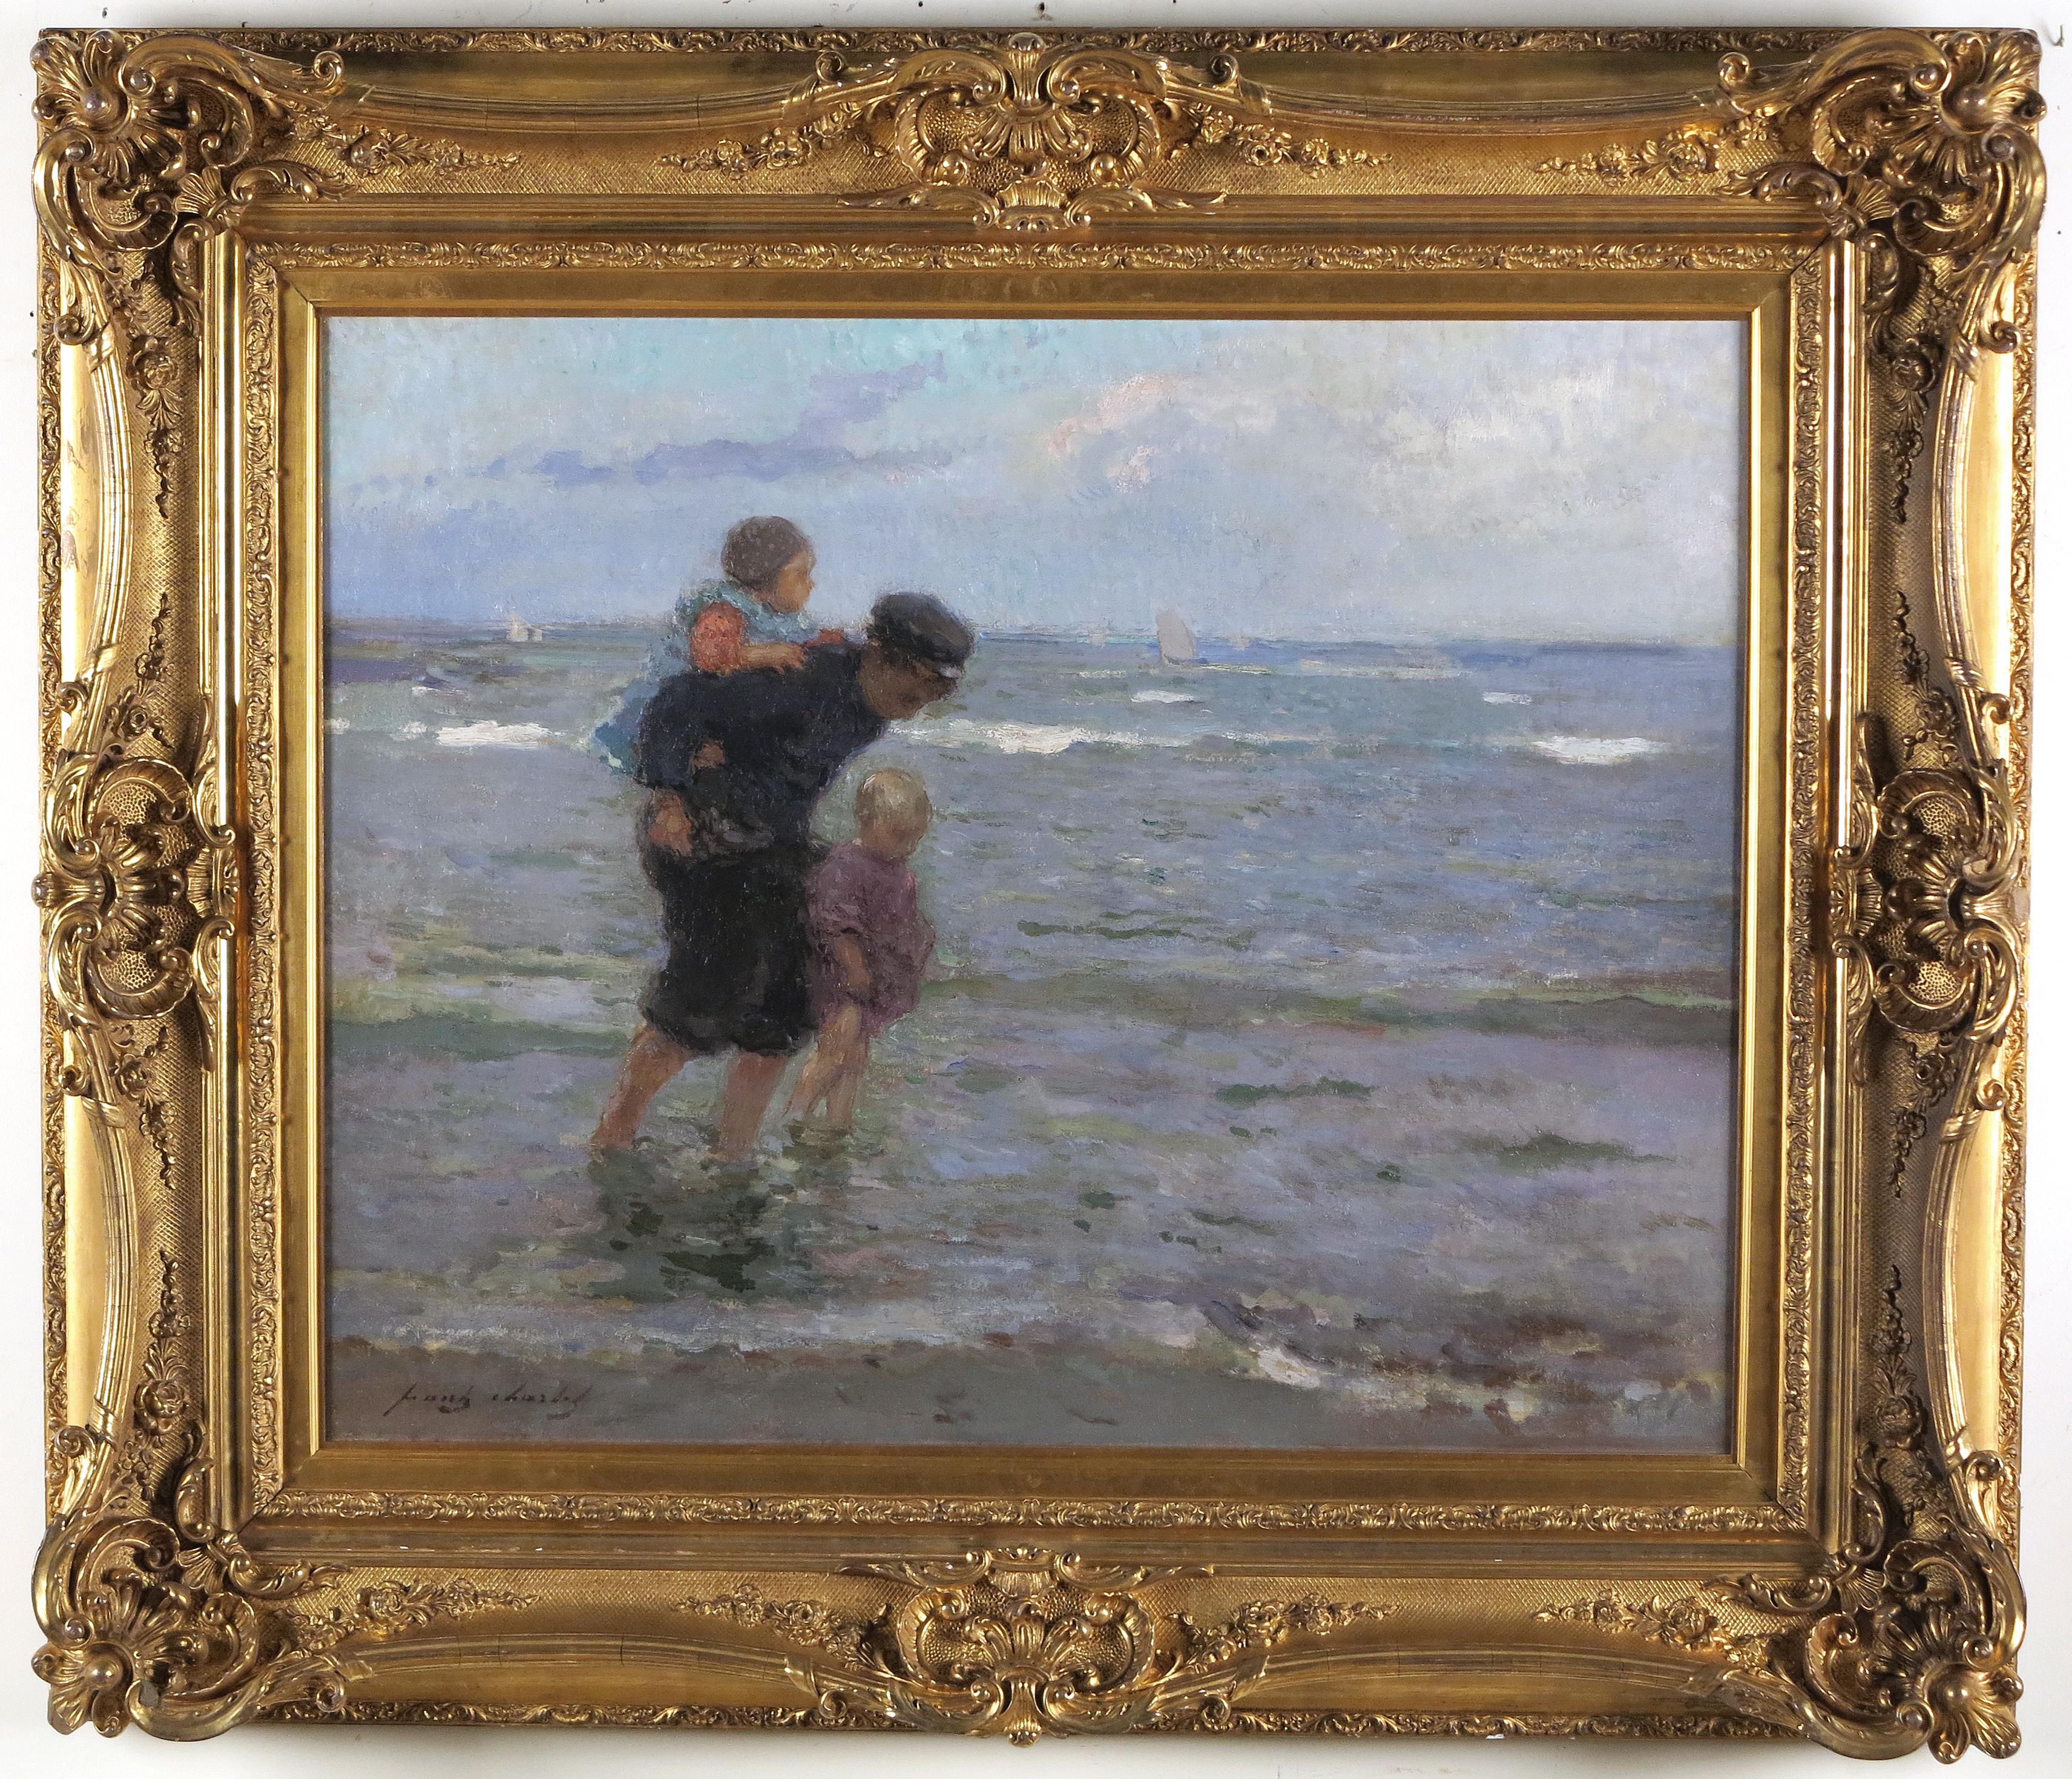 Children Walking along the Beach - Painting by Frantz Charlet